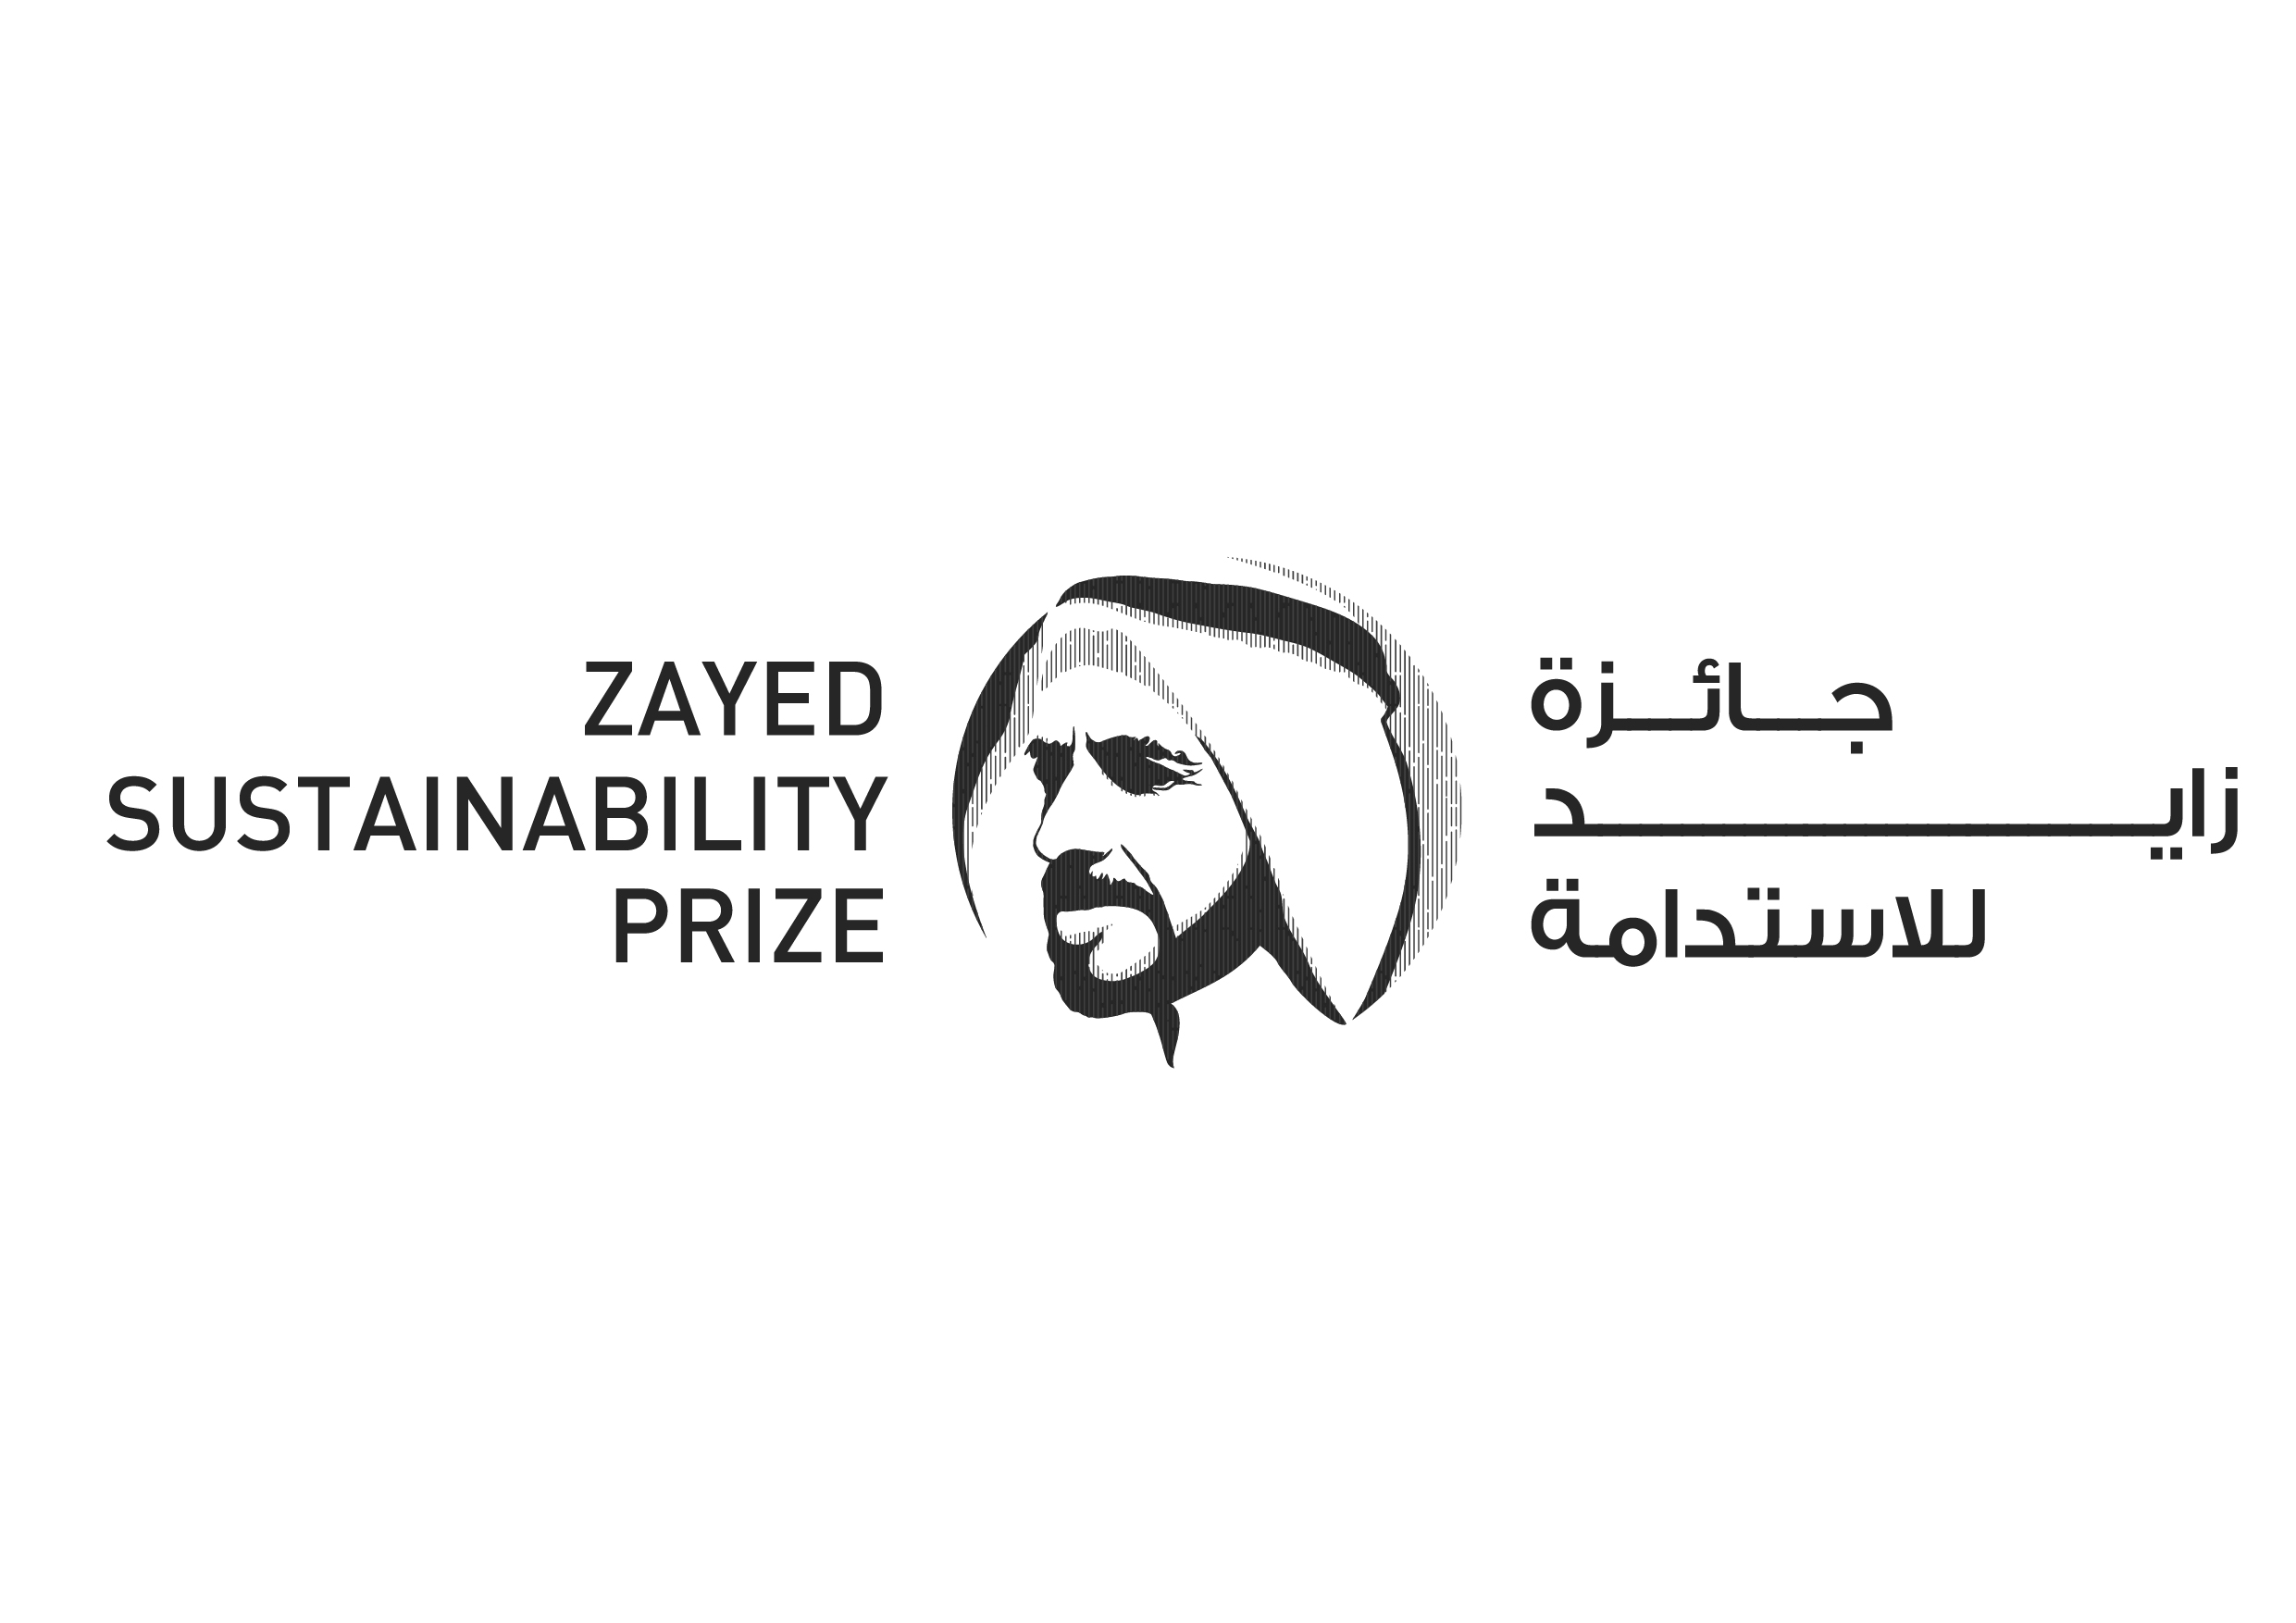 The Zayed Sustainability Prizes Announces Postponement Of 2021 Awards Ceremony